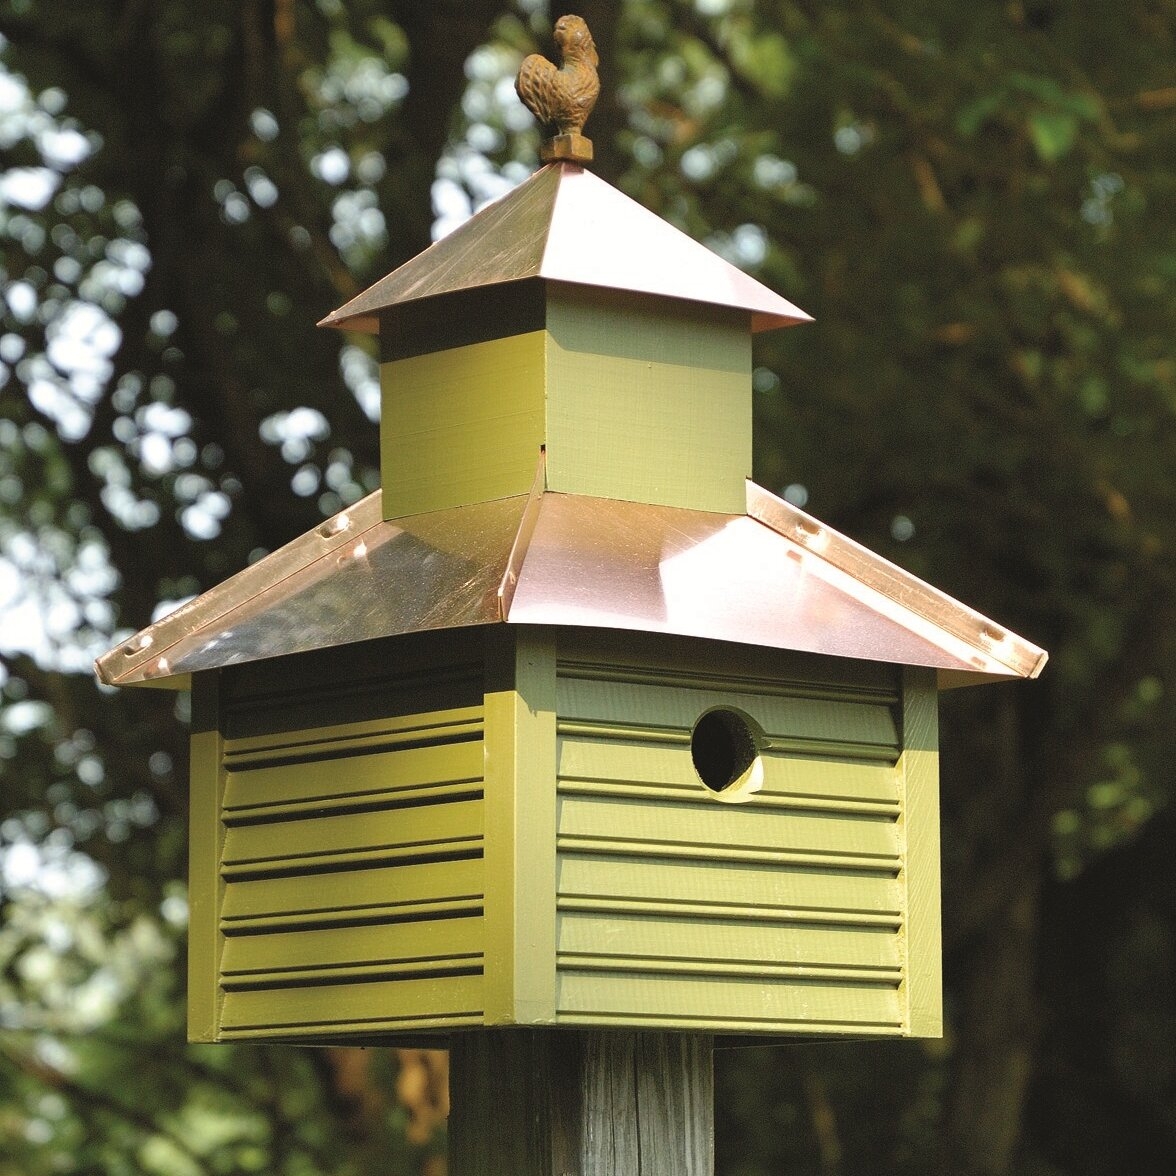 Rusty Rooster Birdhouse